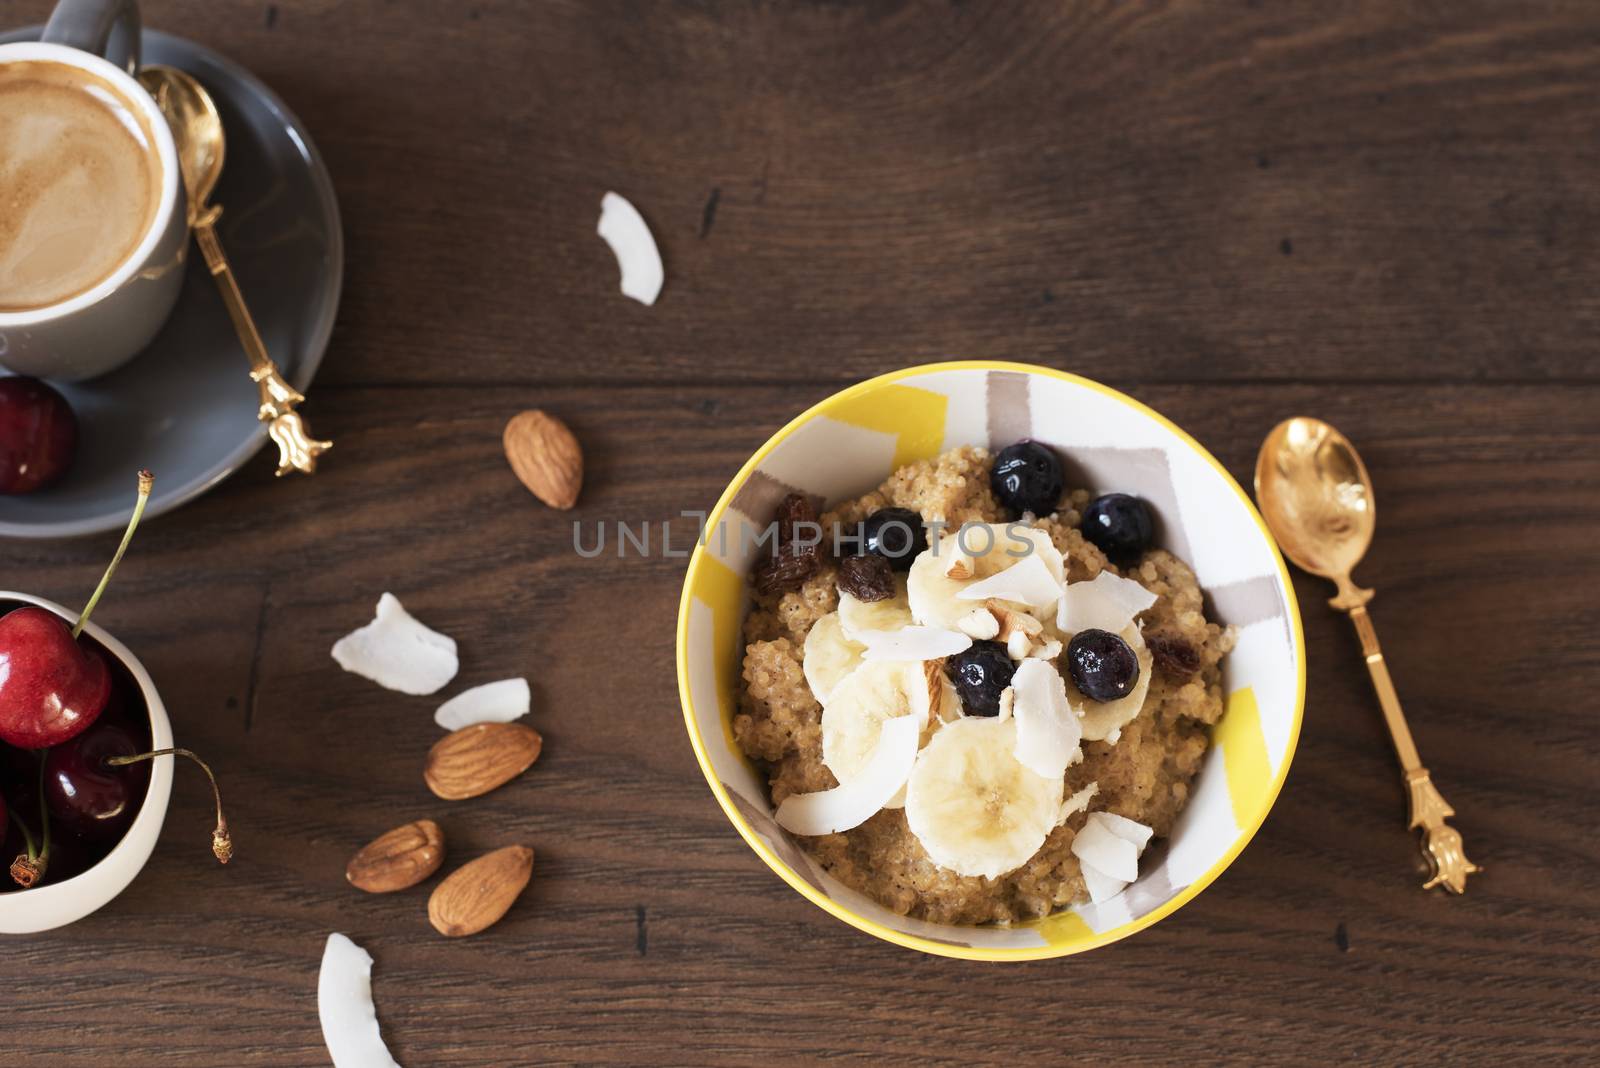 Almond Milk Quinoa With Fresh Fruits, Cherries And Coffee. Healthy Breakfast, Lifestyle Concept. Top View. Dark Wooden Background. Fitness Mood Diet. Summer Light Snack